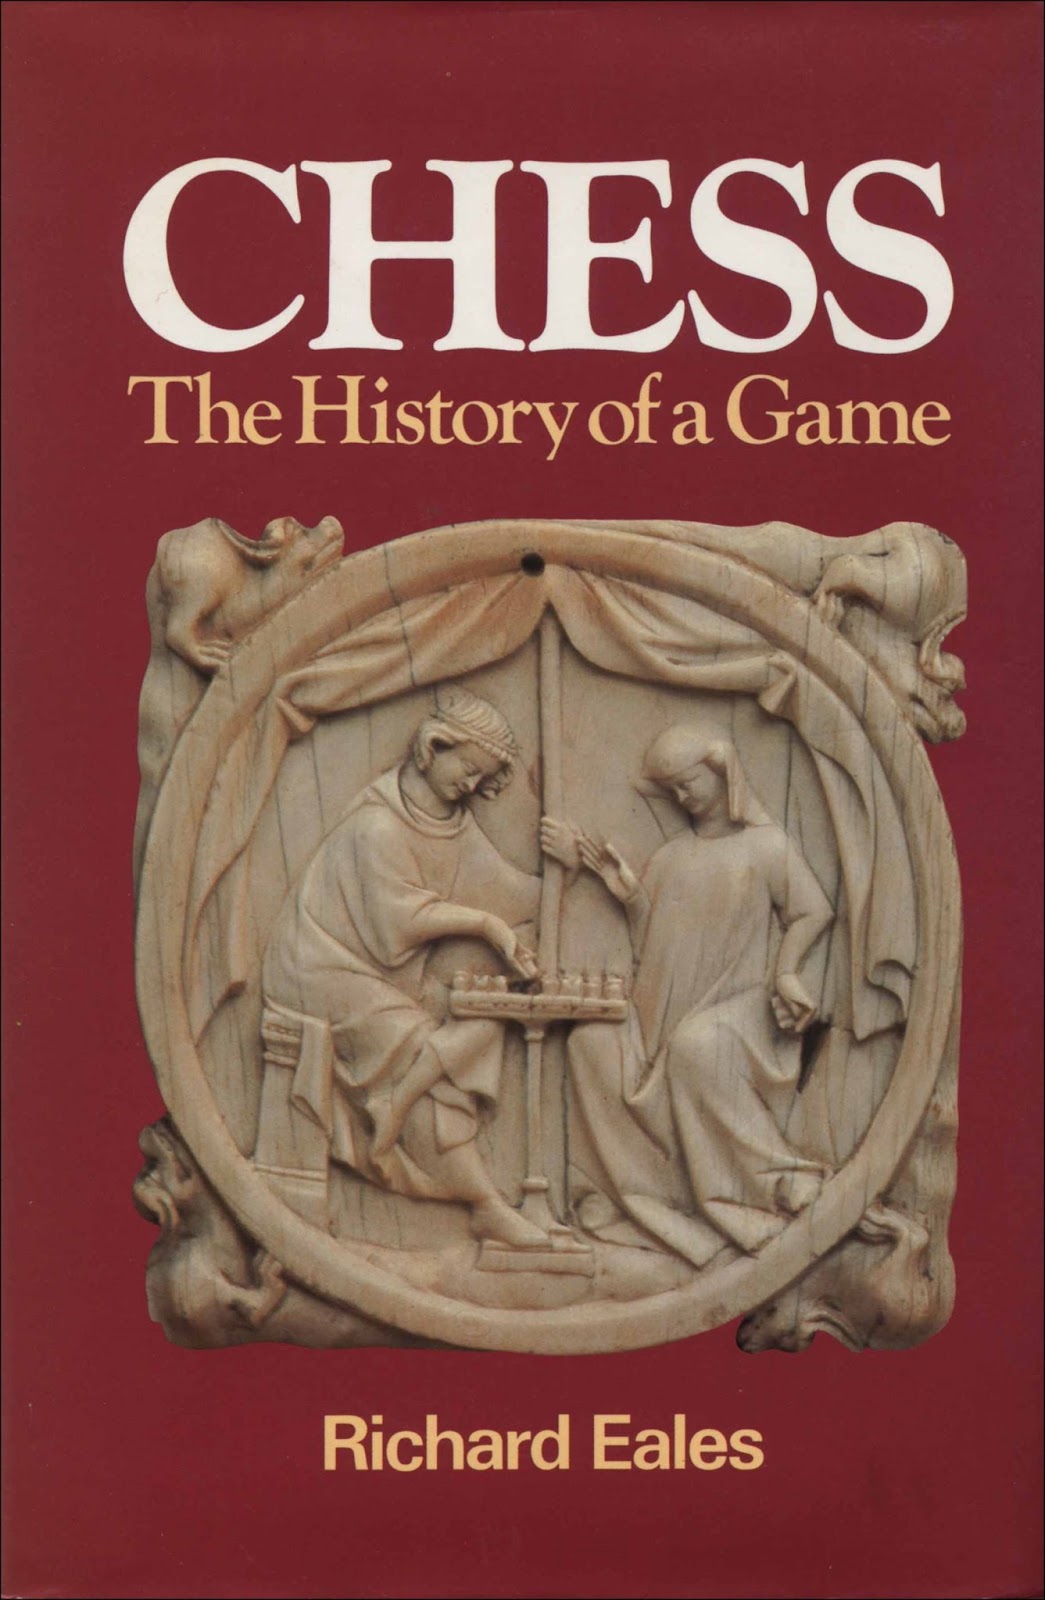 Chess Periodicals An Annotated International Bibliography, 1836-2008, PDF